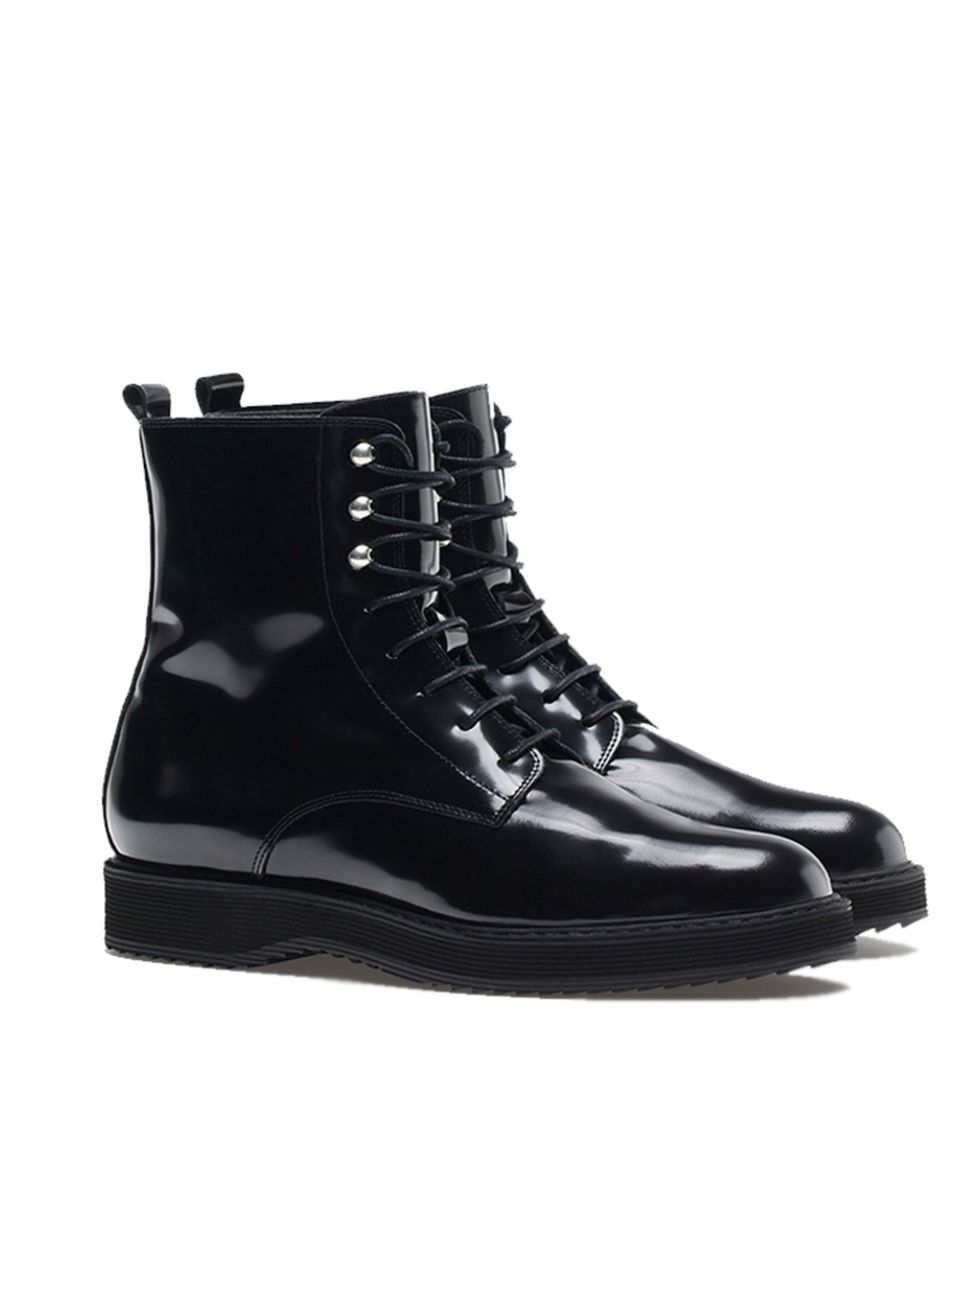 <p><a href="http://www.uterque.com/gb/en/footwear/view-all/lace-up-ankle-boots-c77002p6175922.html?color=040" target="_blank">Uterqüe</a> boots, £145</p>